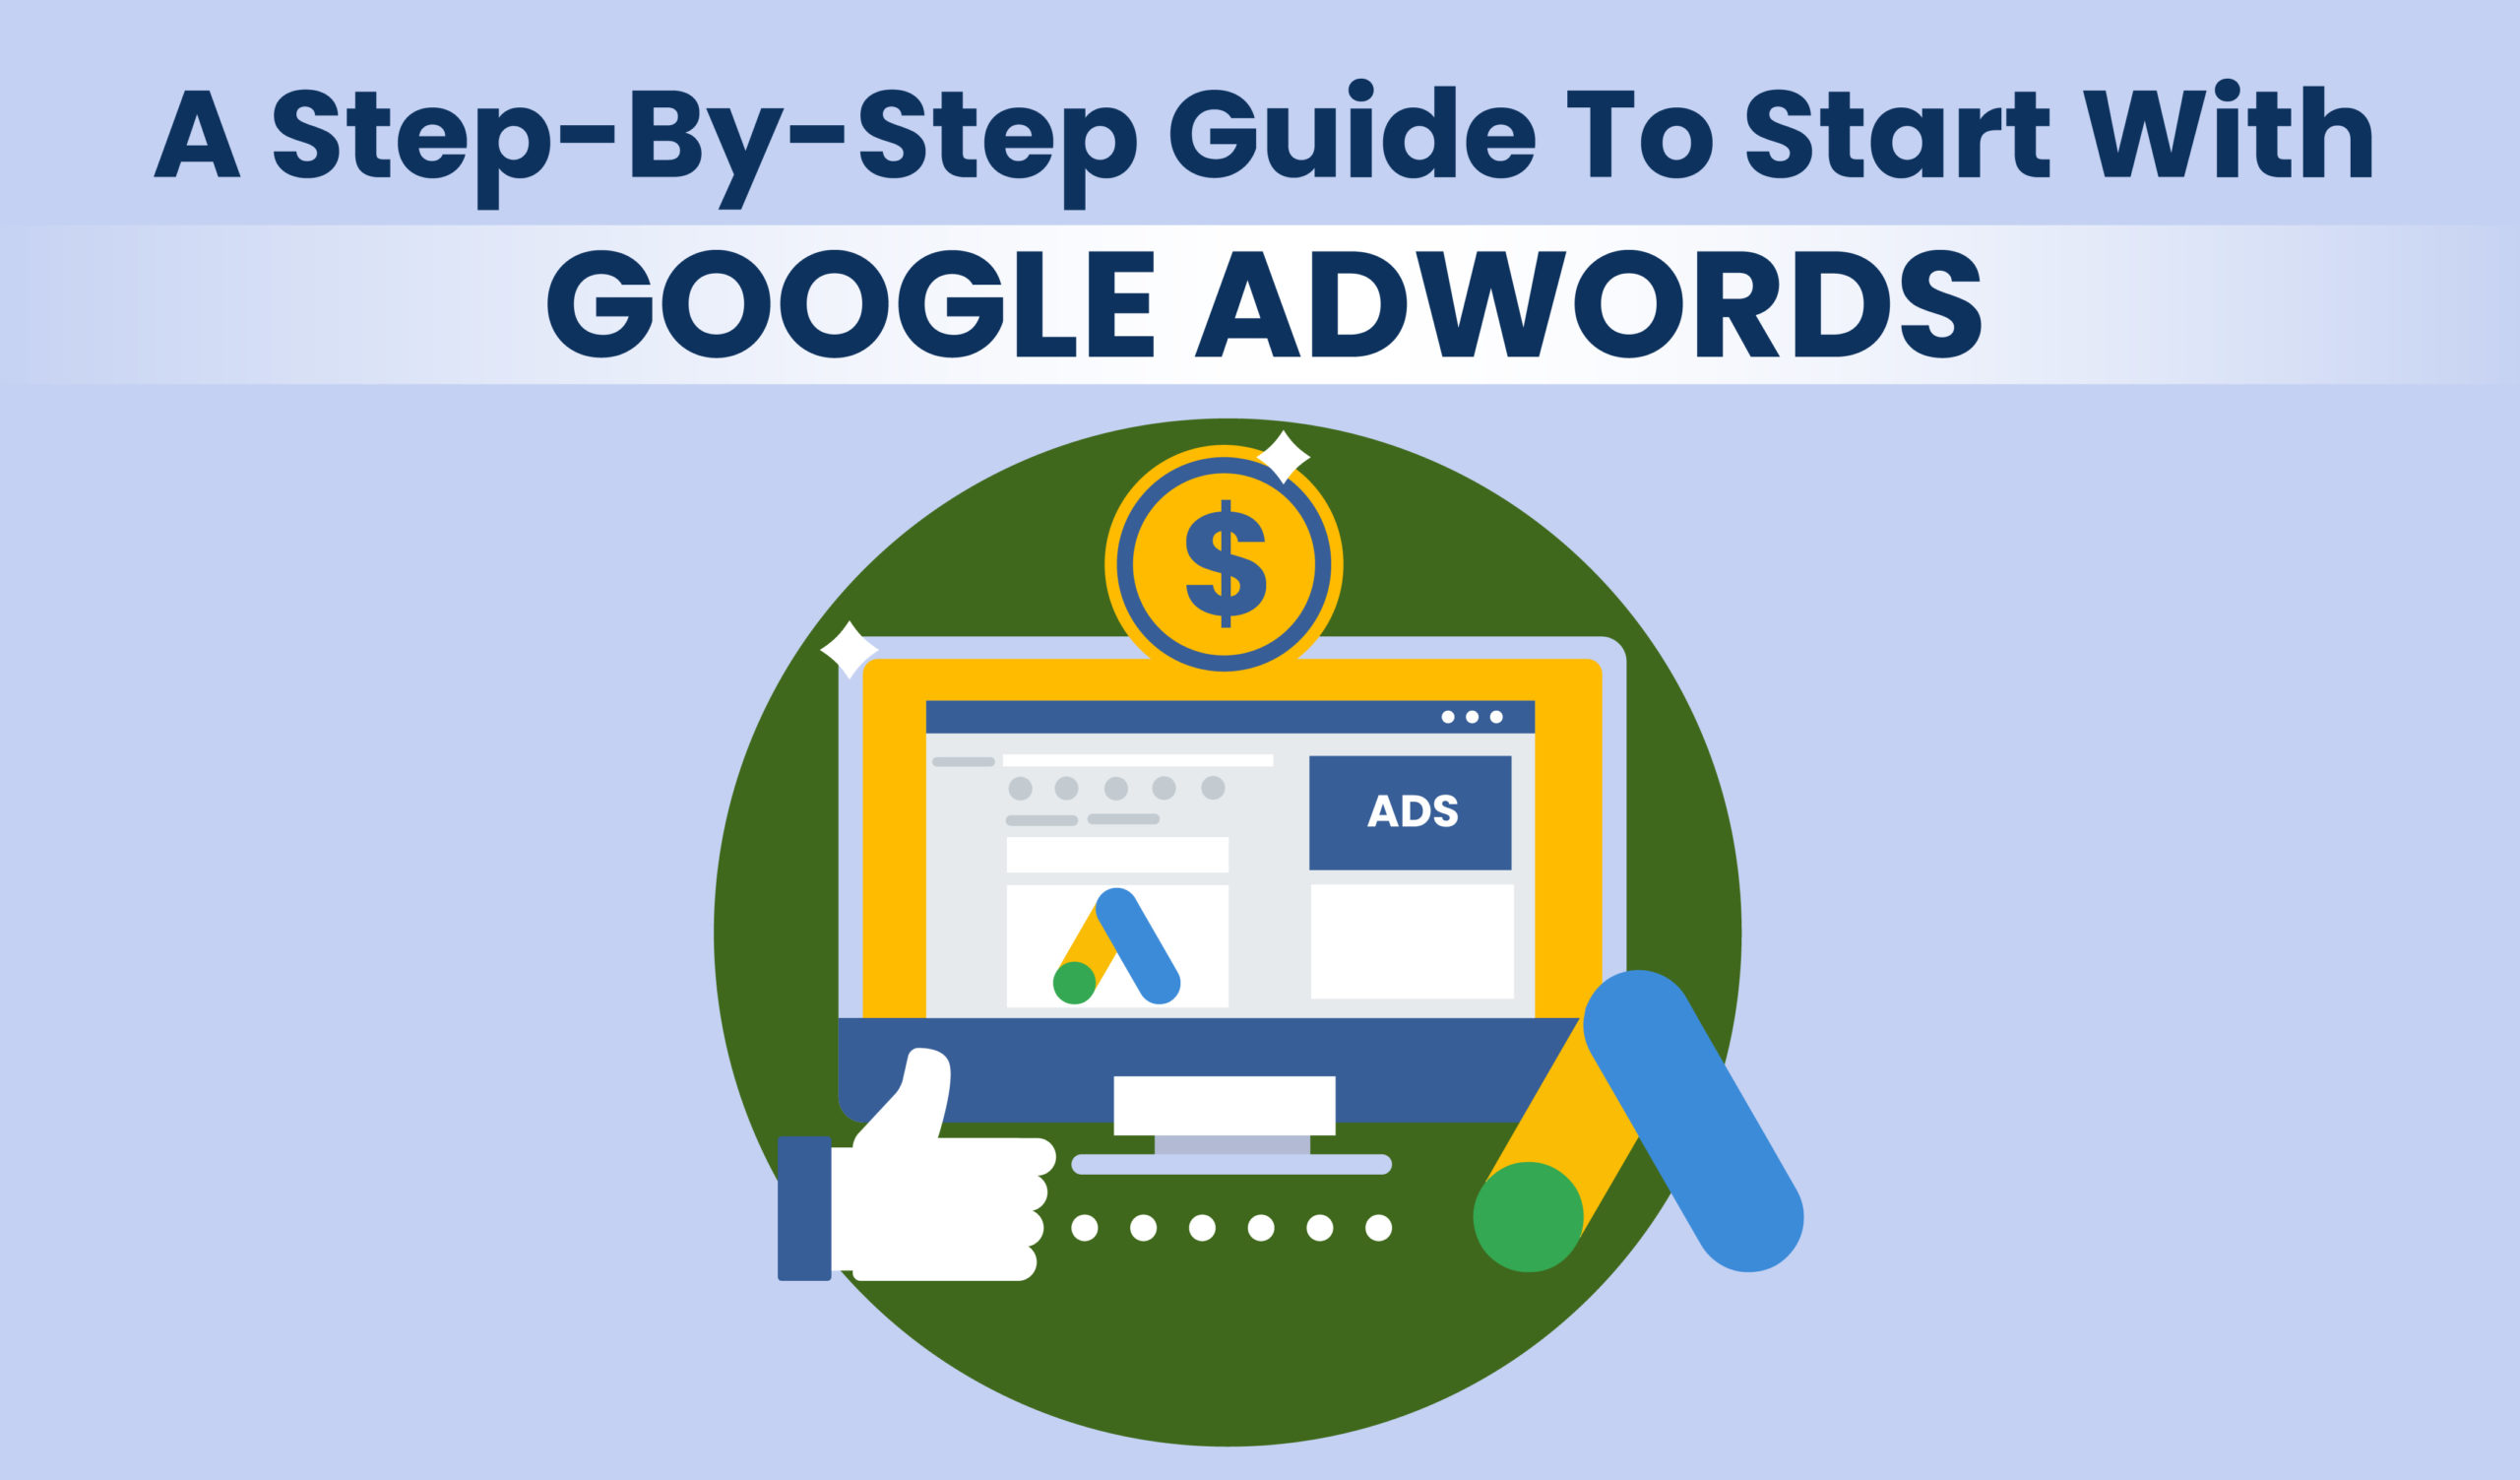 A Step-By-Step Guide to Start With Google Ads